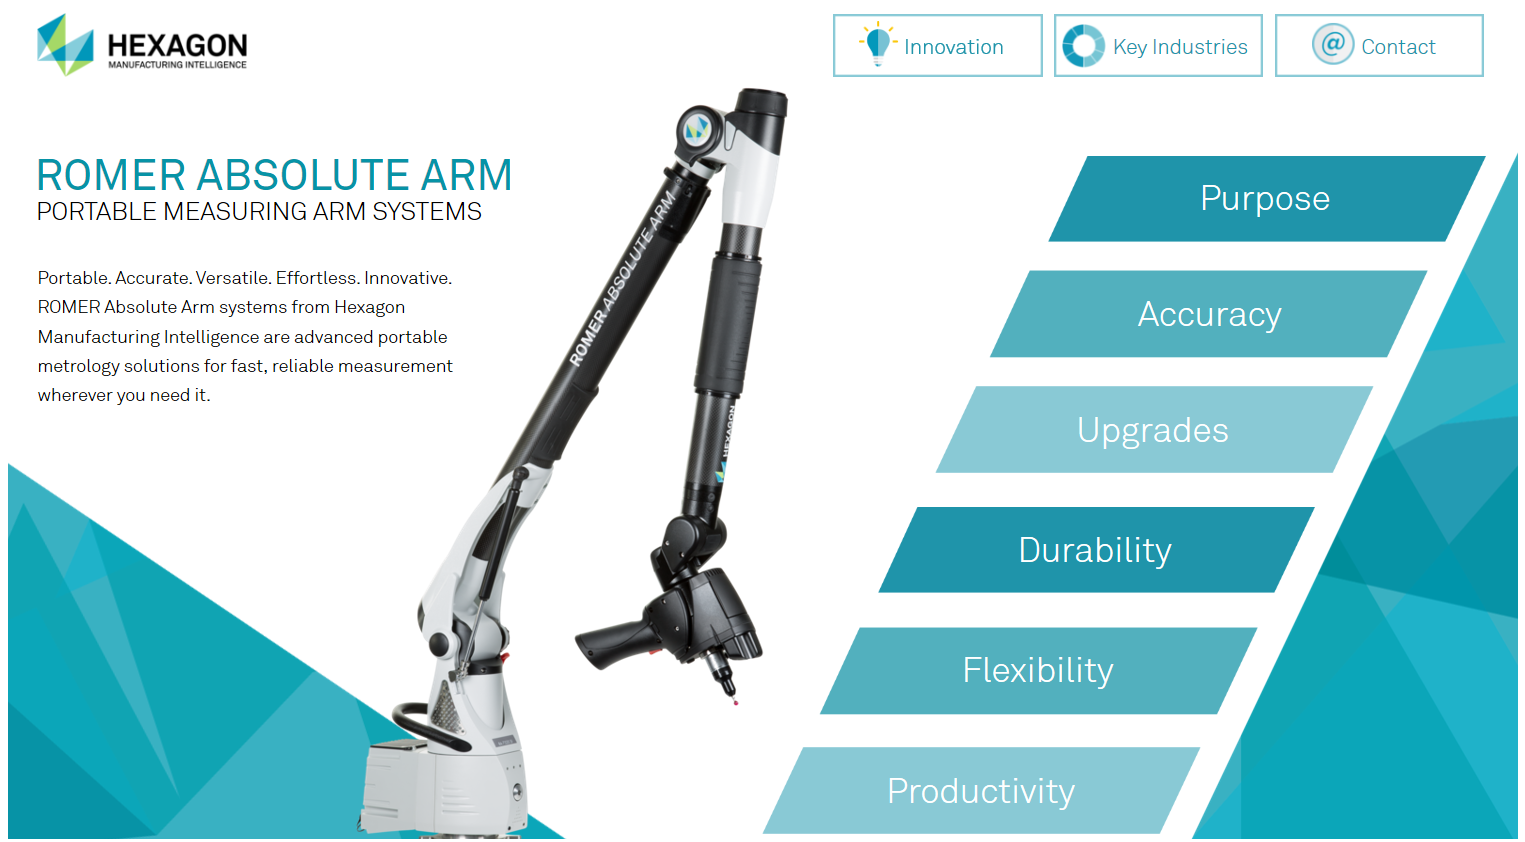 Introducing Romer Absolute Arm!